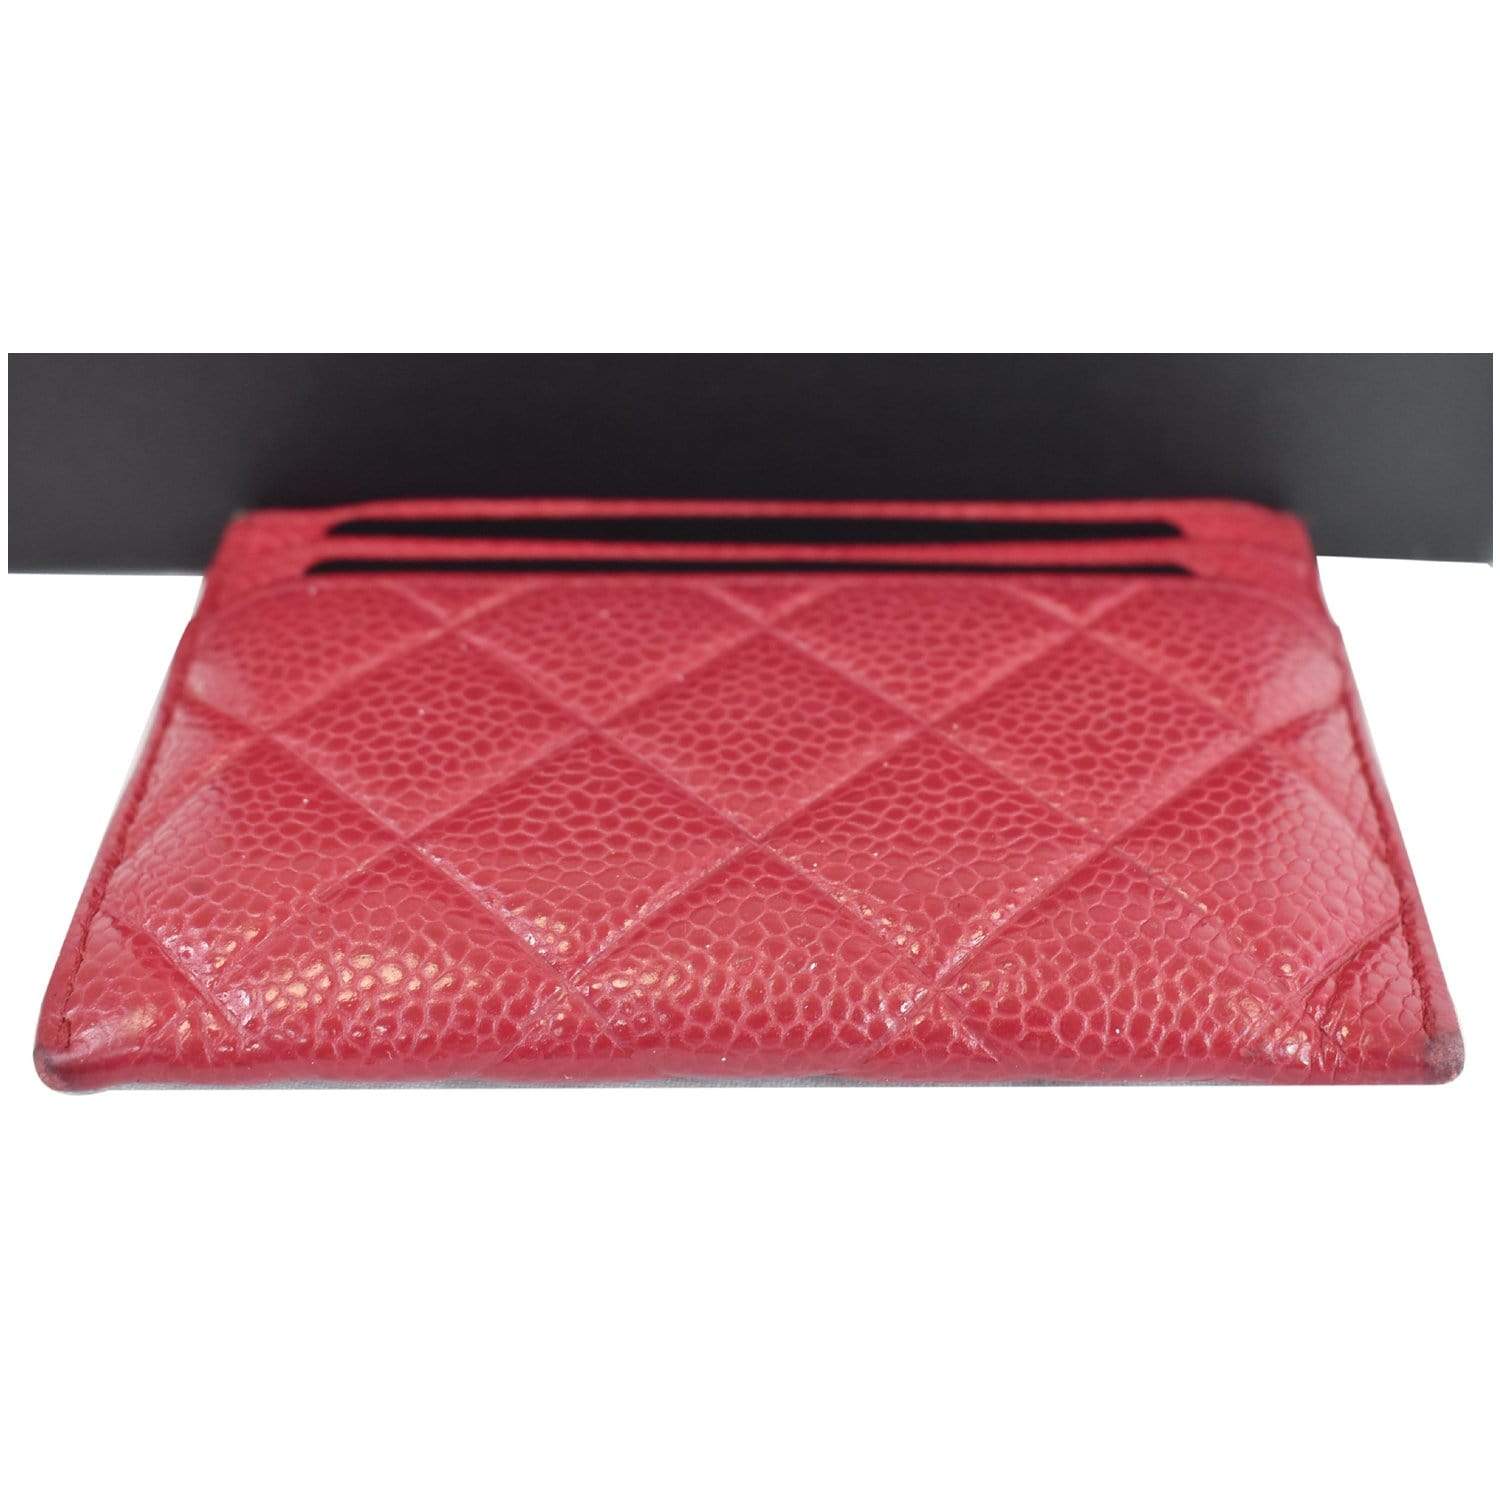 CHANEL Pink Leather Wallets for Women for sale